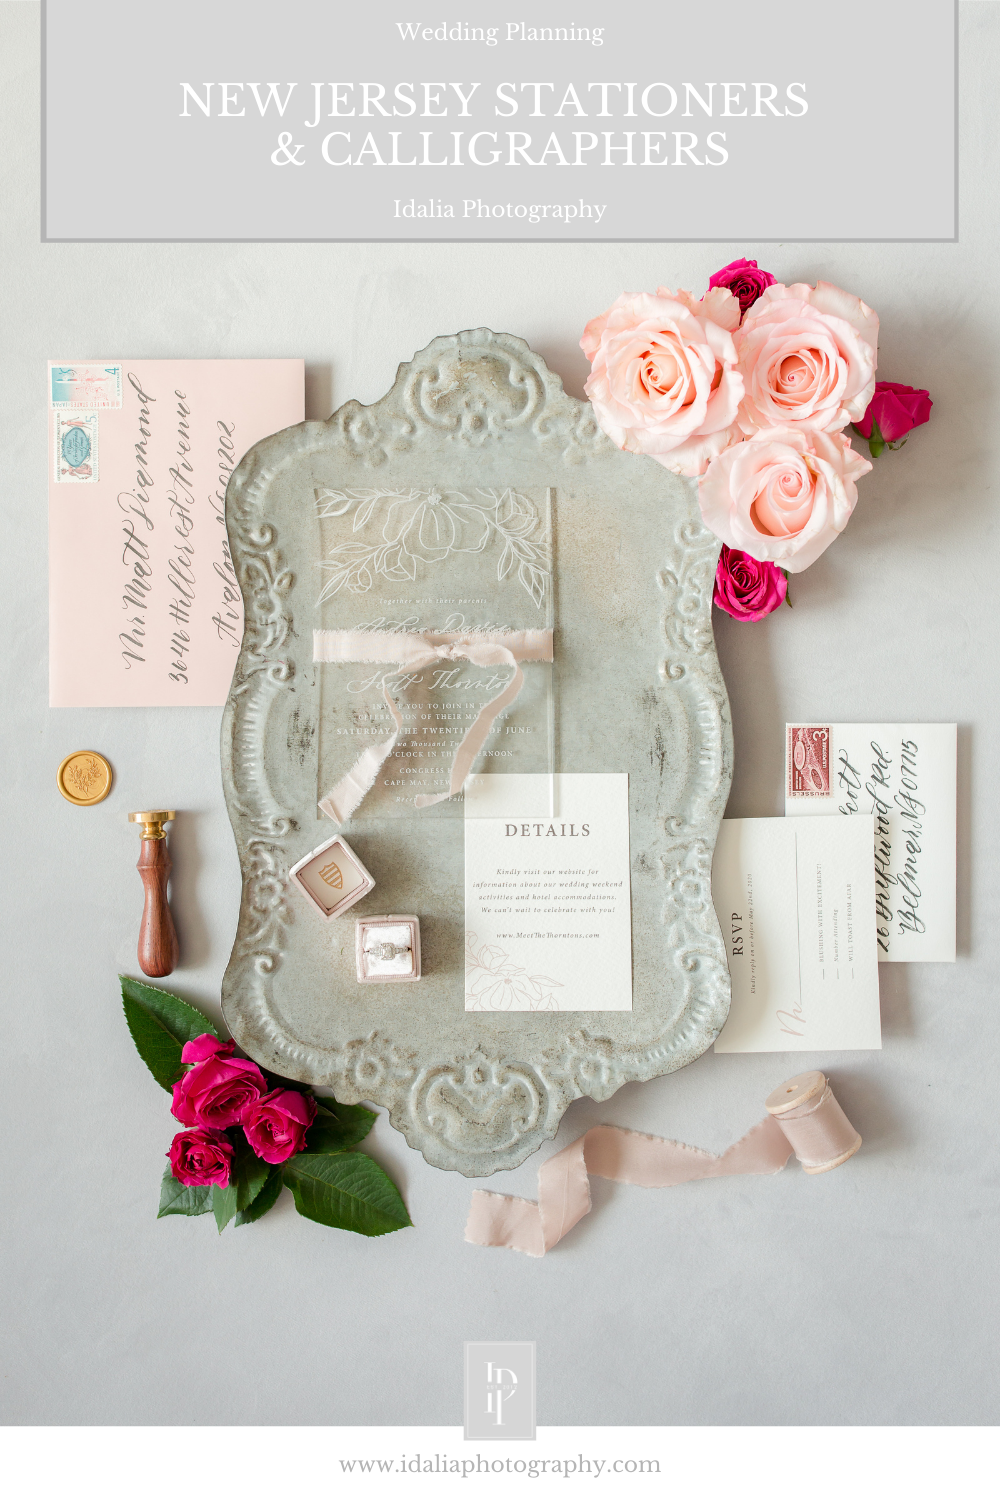 7 NJ Stationers and calligraphers I love working with as a New Jersey wedding photographer, shared by Idalia Photography.